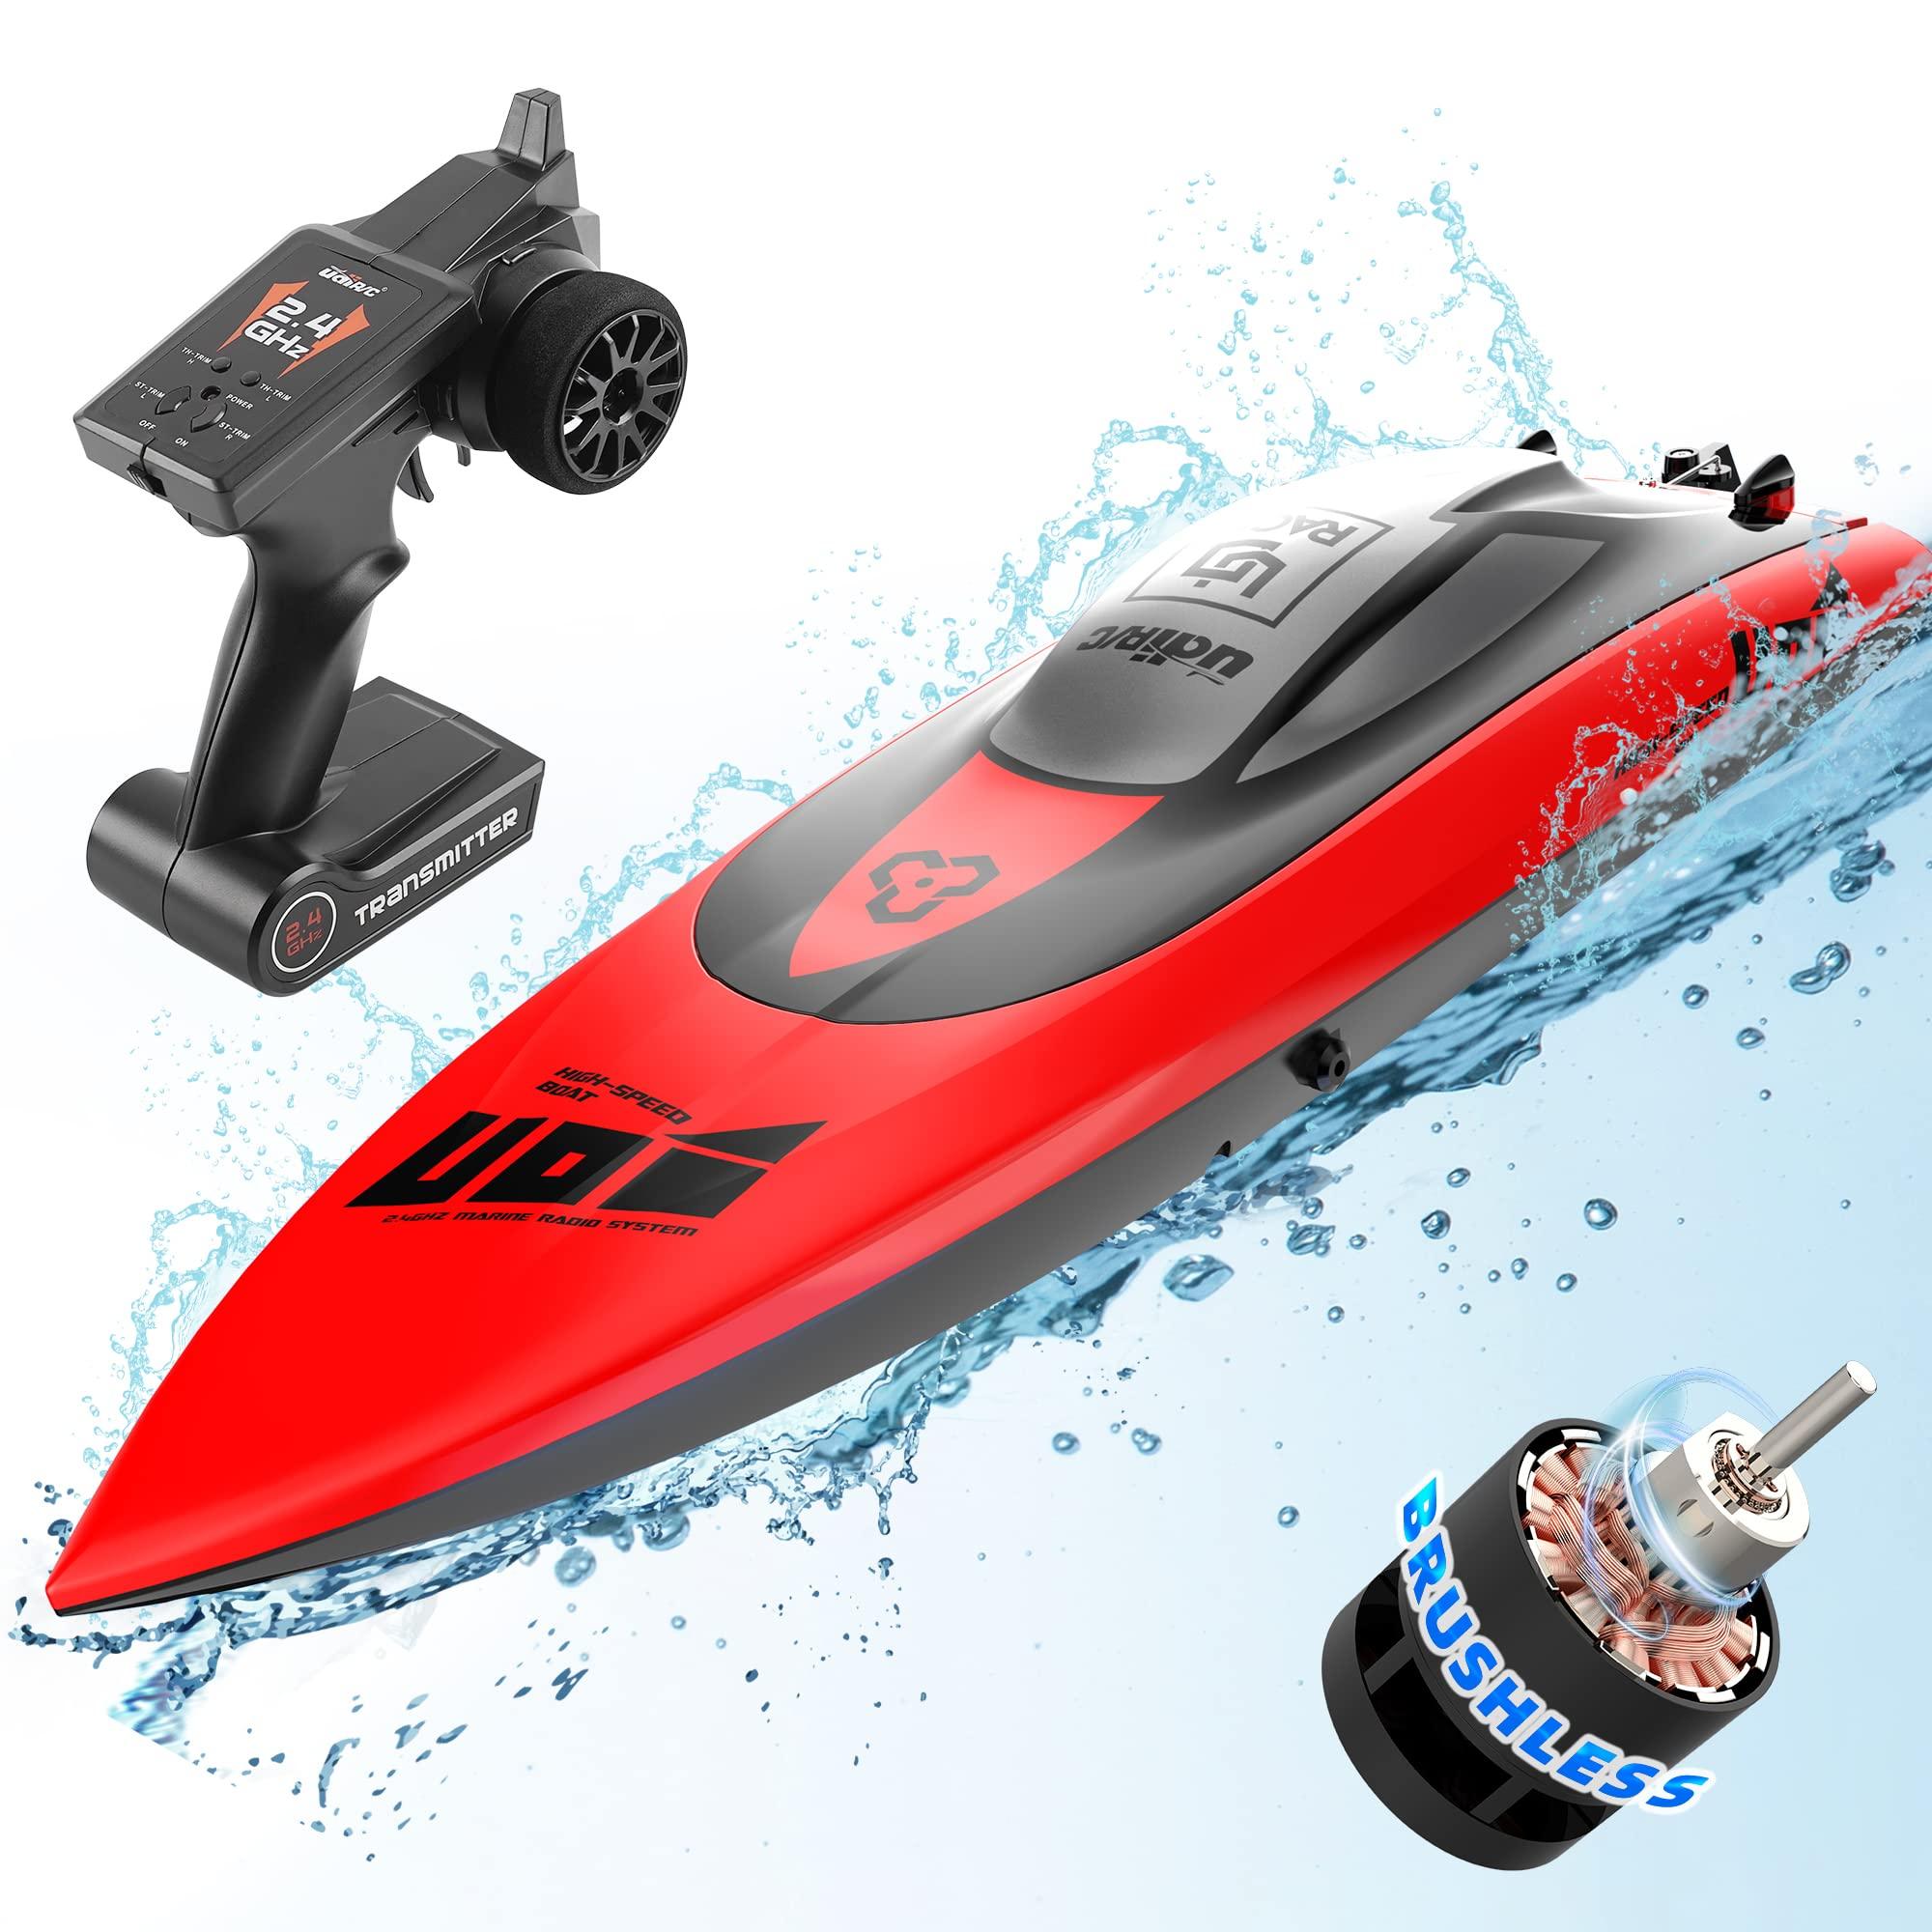 Rc Boats That Go 40 Mph: High-performance RC boats that reach 40 mph with ease.